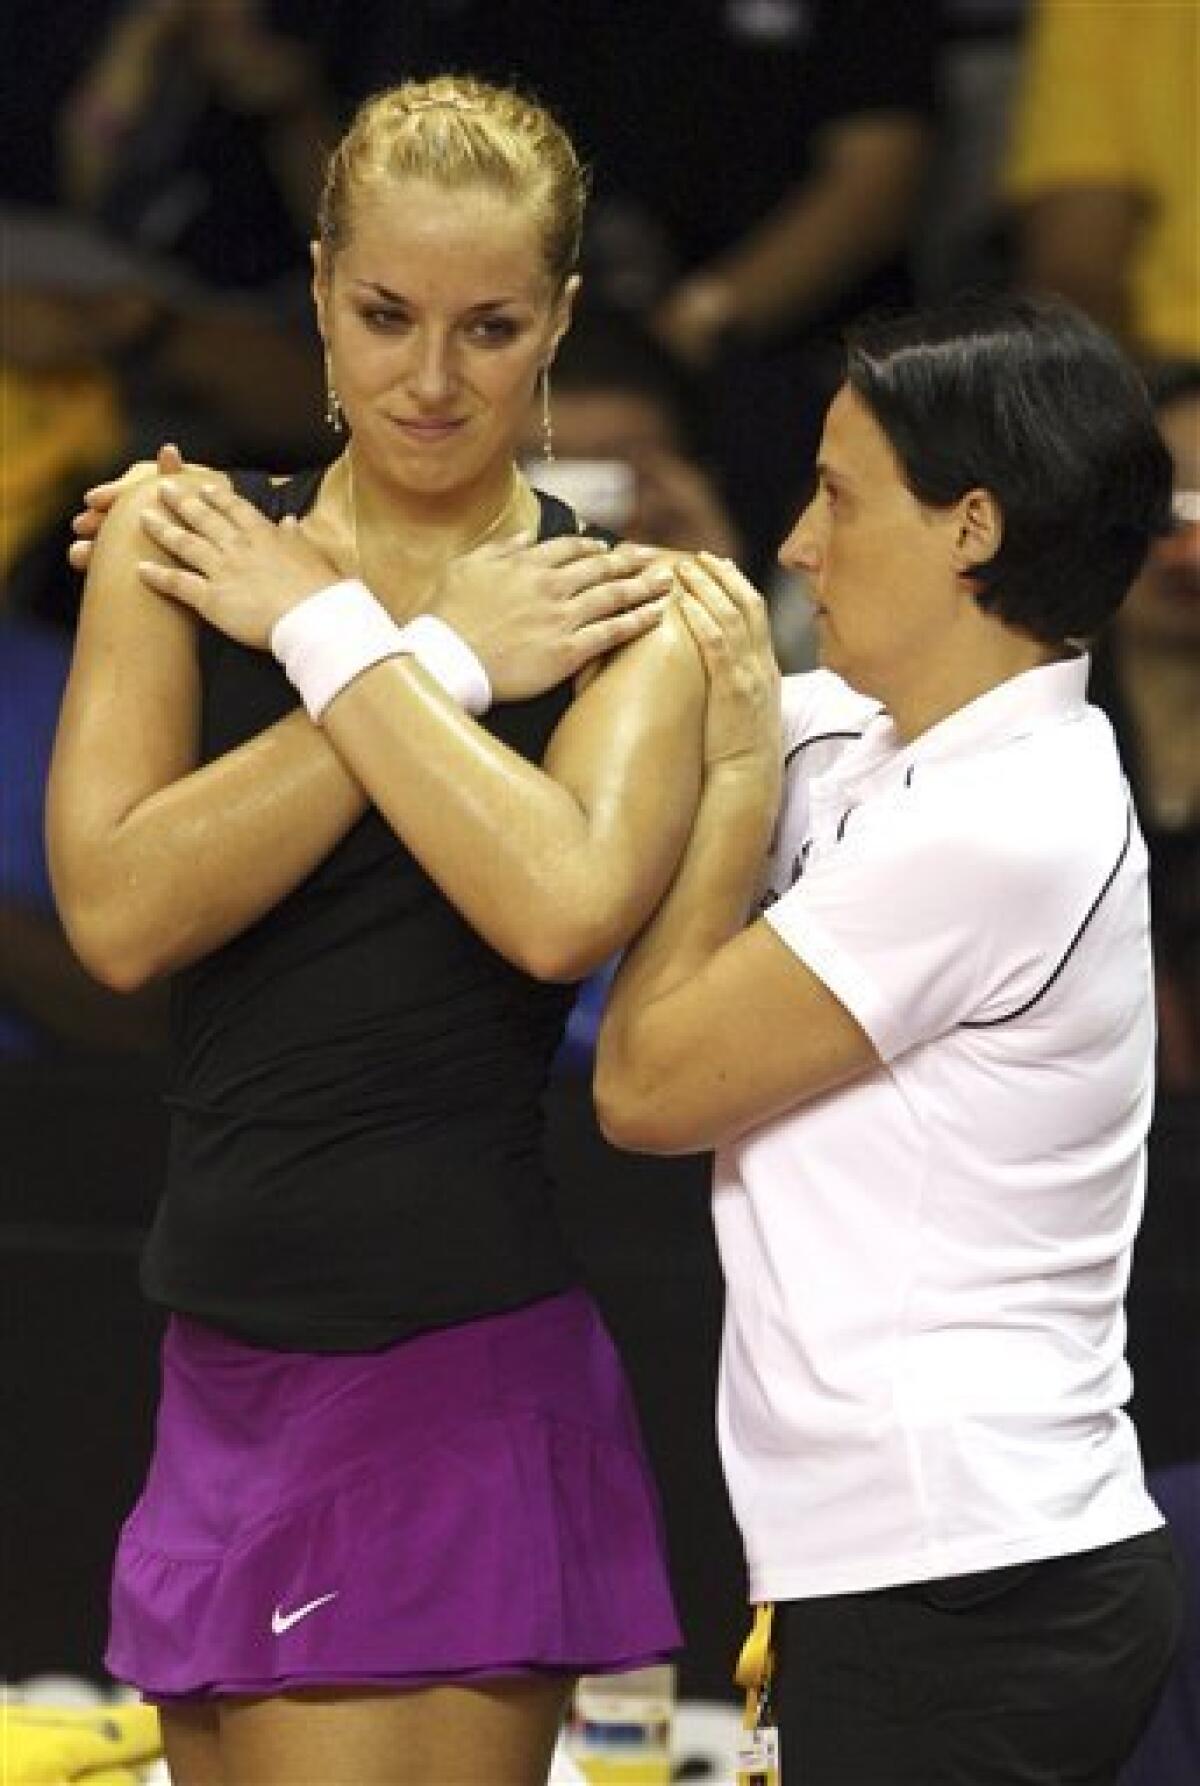 Sabine Lisicki of Germany, left, has treatment during her semifinal tennis match against Anabel Medina Garrigues of Spain at the Bali Tournament of Champions in Nusa Dua, Bali, Indonesia, Saturday, Nov. 5, 2011. Garrigues won the match as Lisicky retired with a back injury. (AP Photo/Firdia Lisnawati)